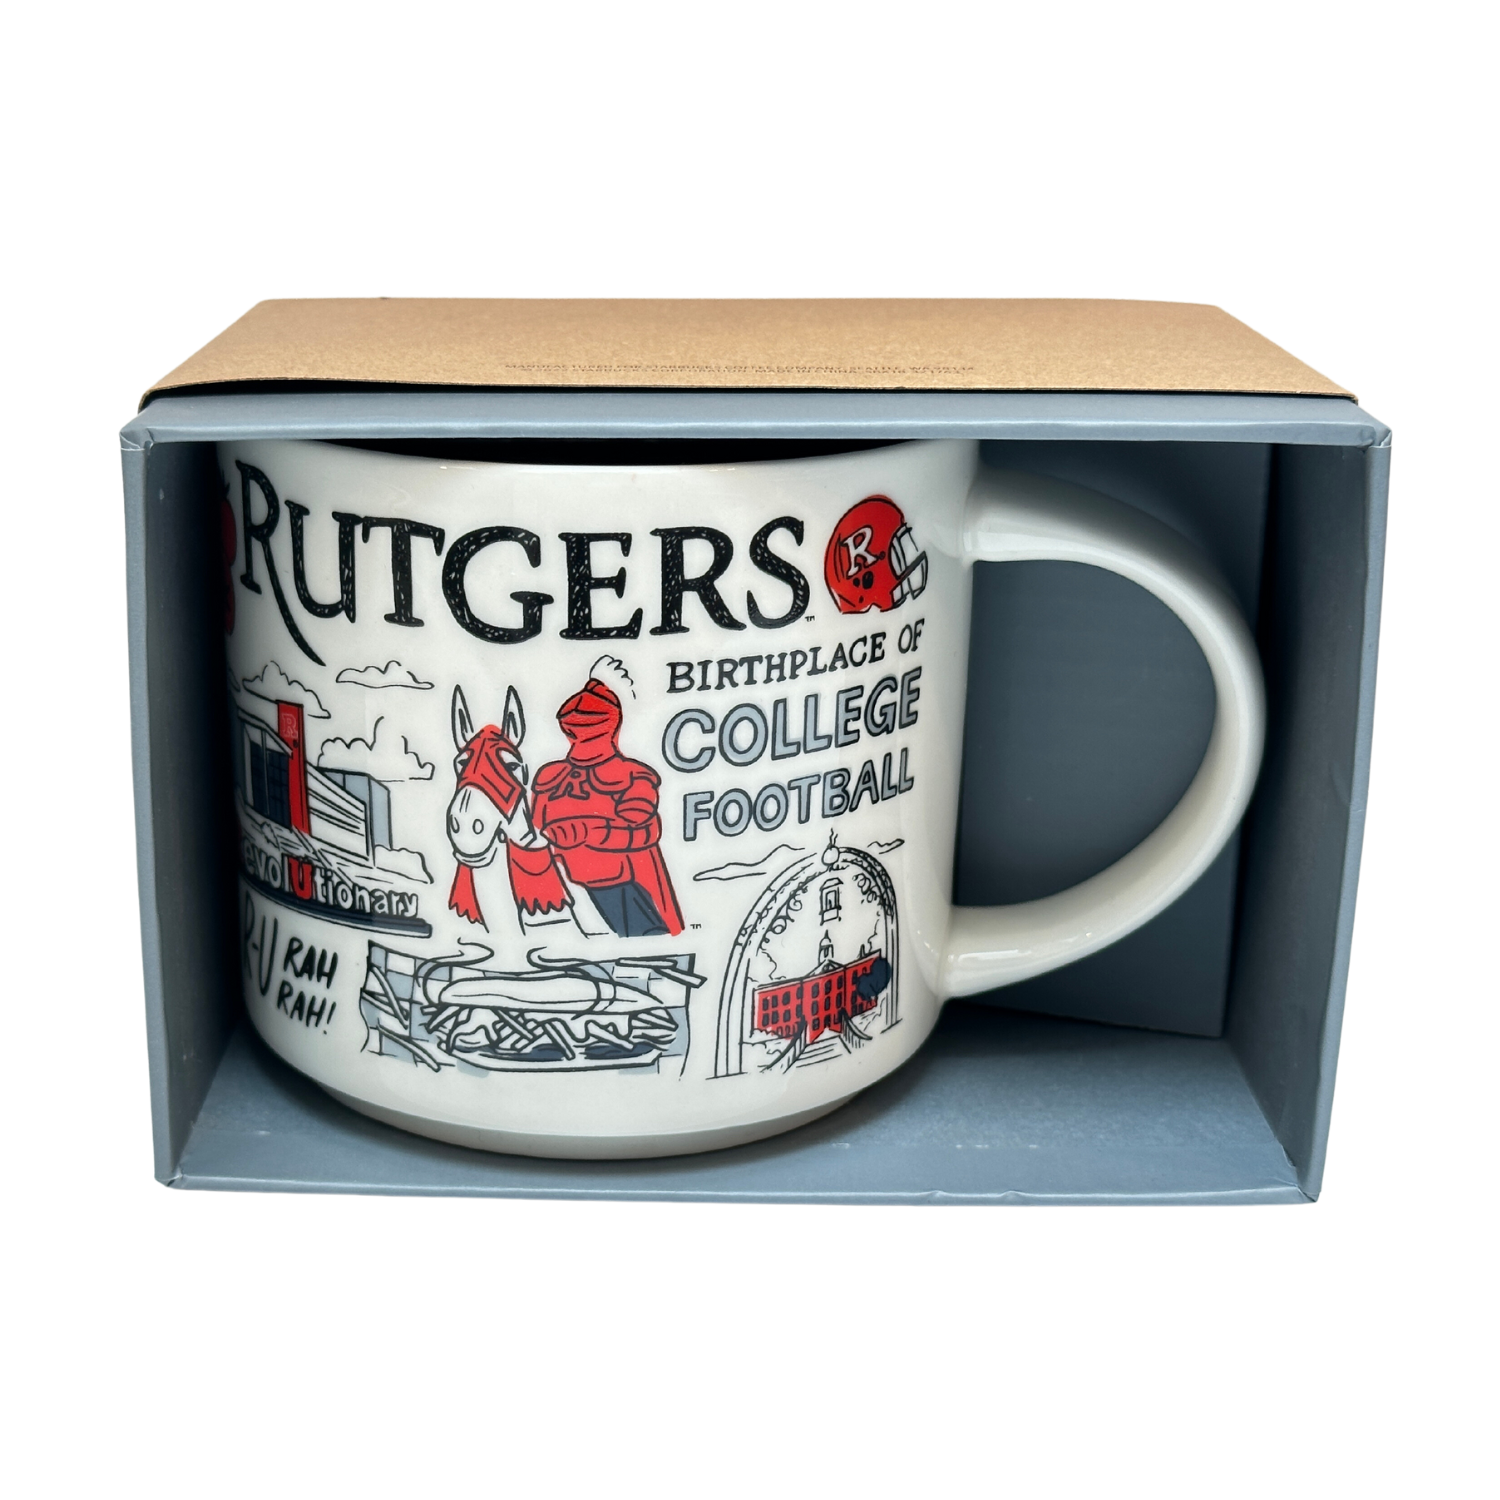 Starbucks Been There Series Mug Cup Rutgers College Football Campus Collection 2022, 14 Oz